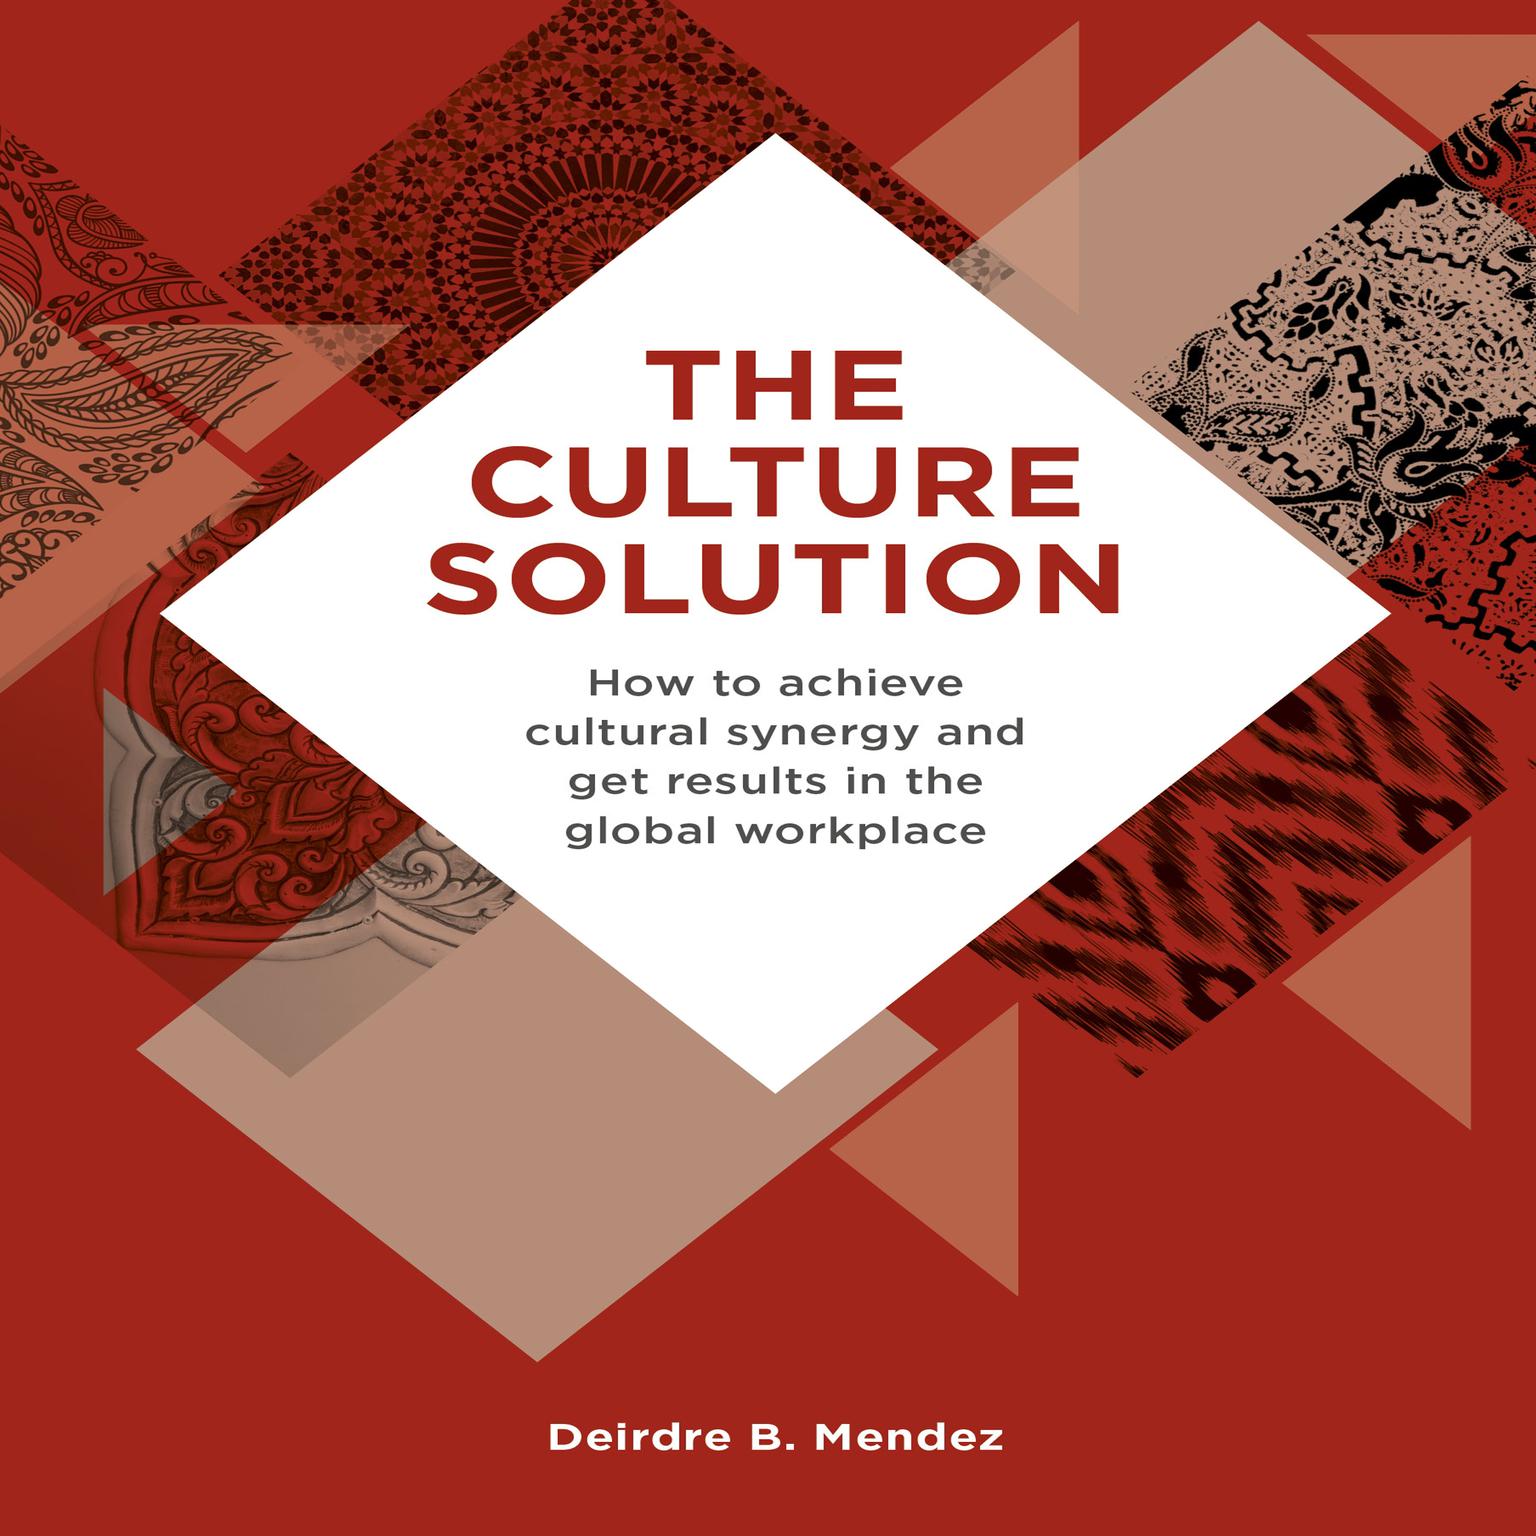 The Culture Solution: How to Achieve Cultural Synergy and Get Results in the Global Workplace Audiobook, by Deirdre B. Mendez